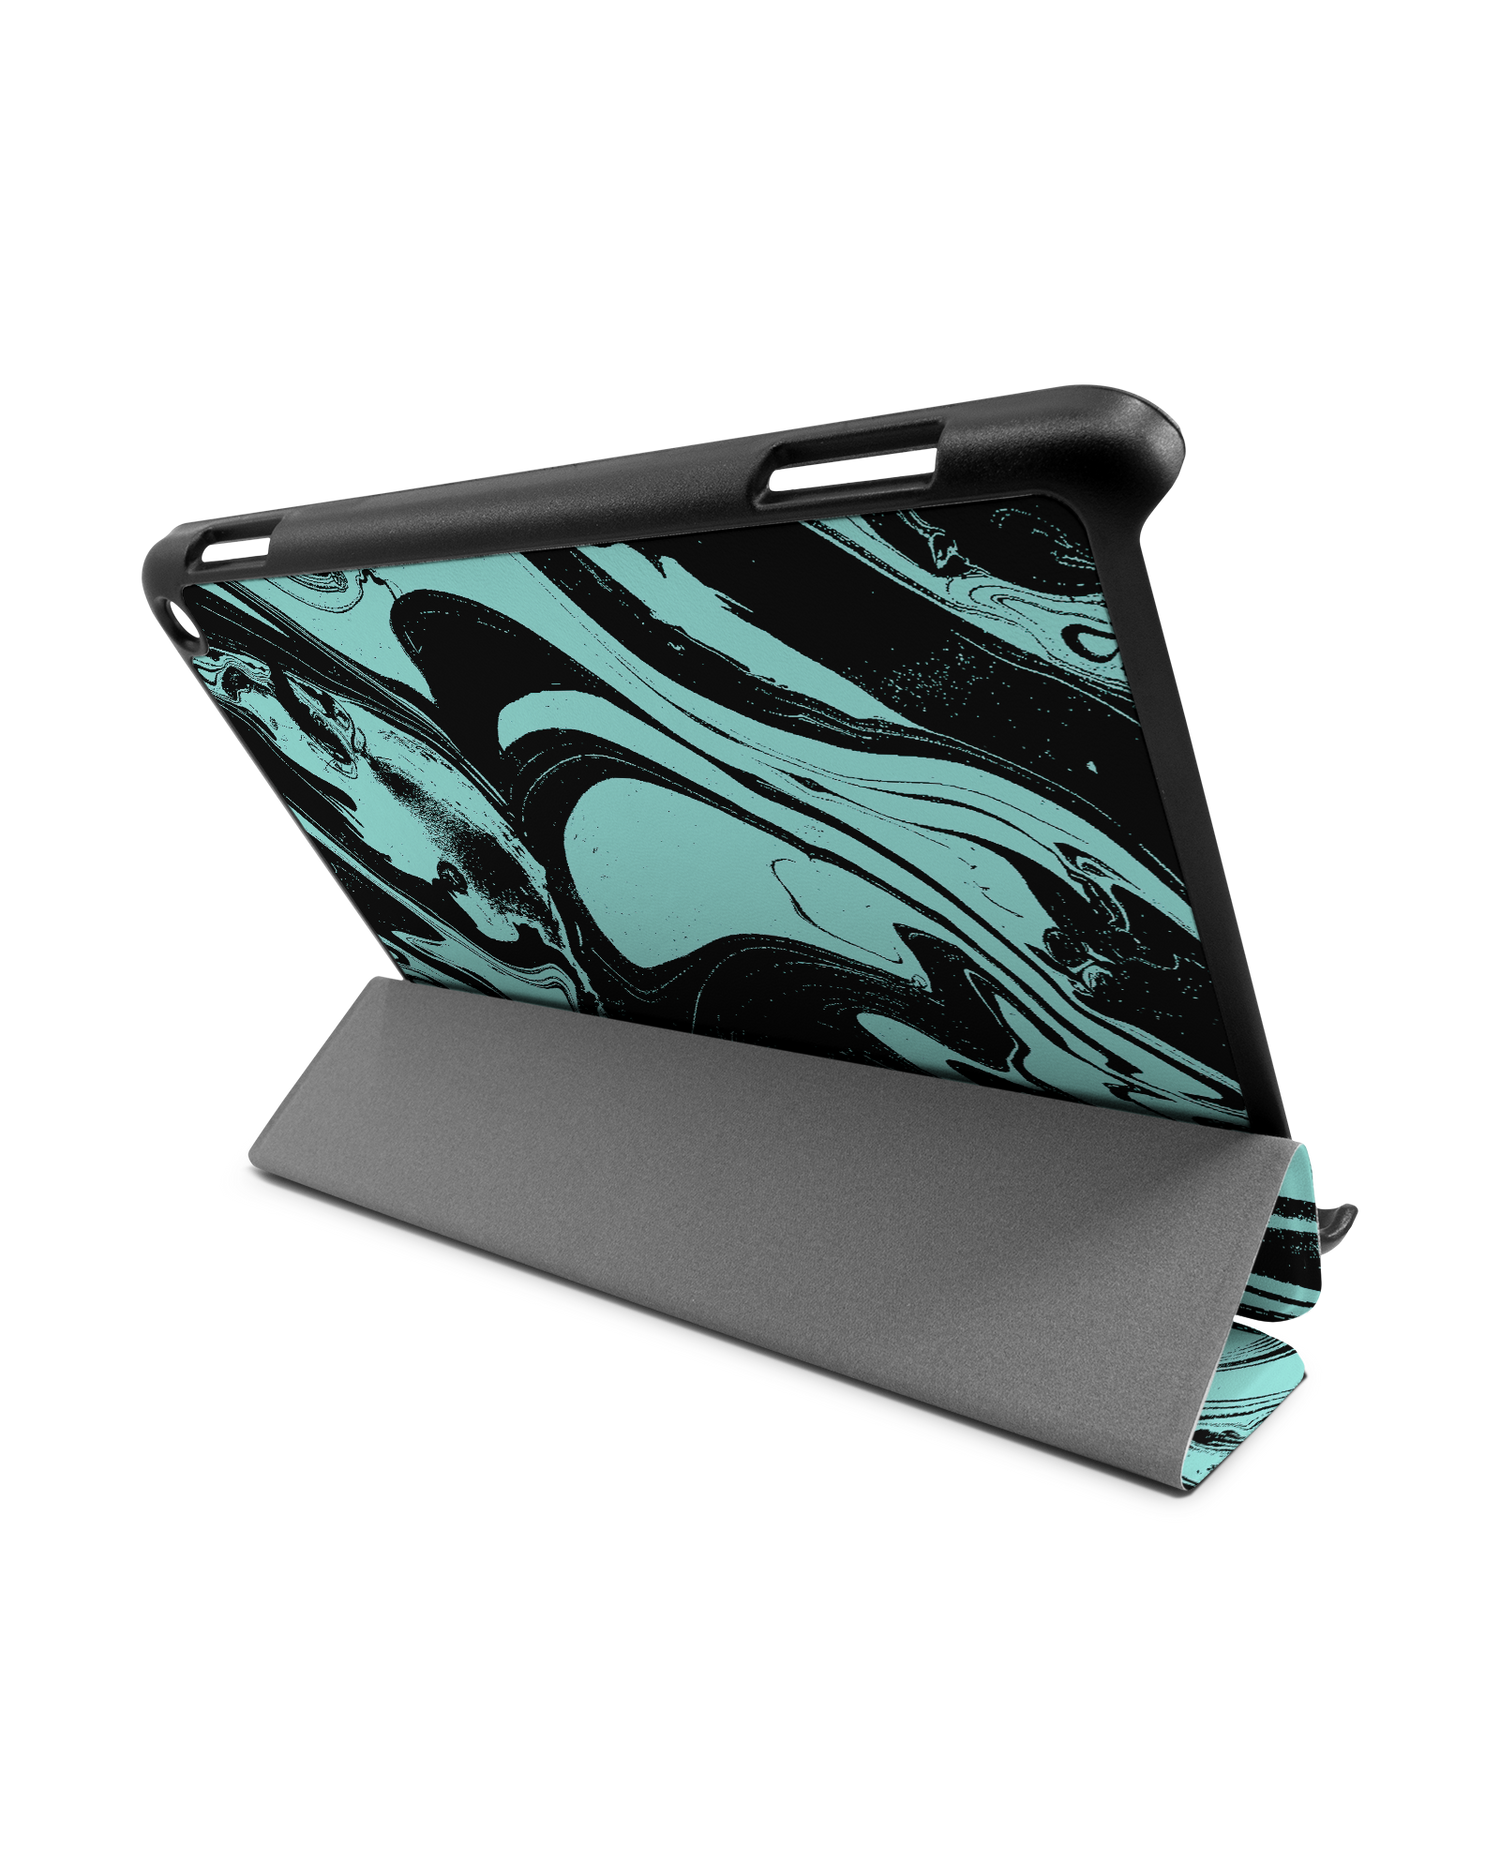 Mint Swirl Tablet Smart Case for Amazon Fire HD 8 (2022), Amazon Fire HD 8 Plus (2022), Amazon Fire HD 8 (2020), Amazon Fire HD 8 Plus (2020): Used as Stand